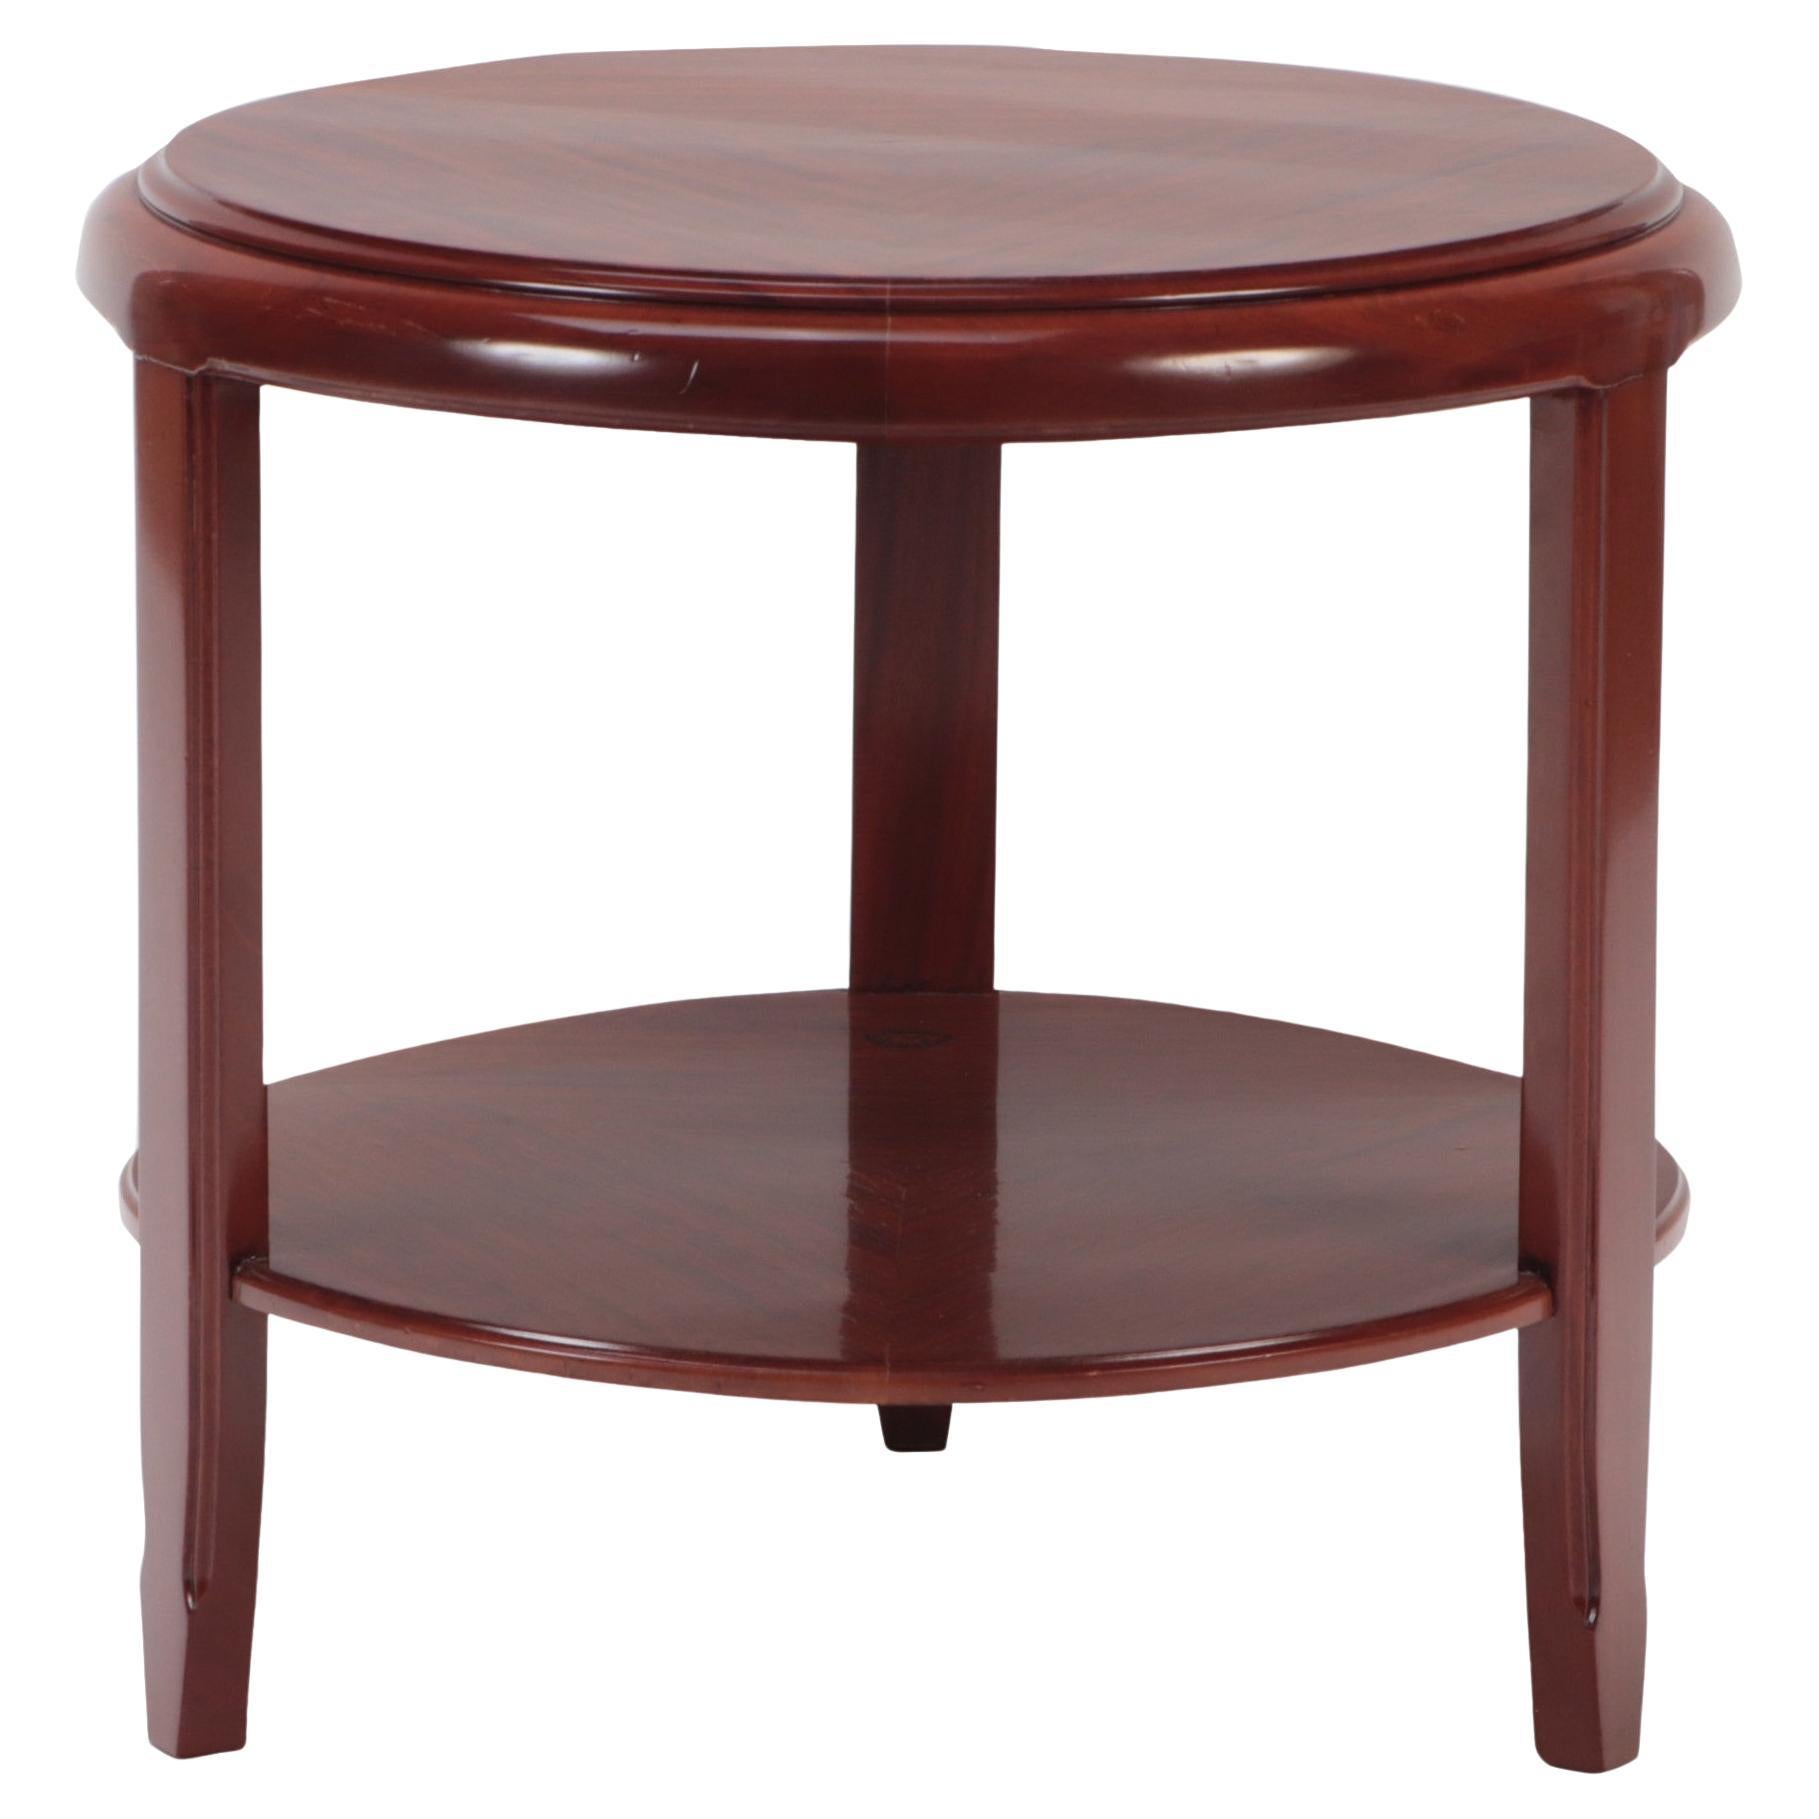 French Art Deco Mahogany Side Table by Louis Majorelle, Signed, Circa 1930 For Sale